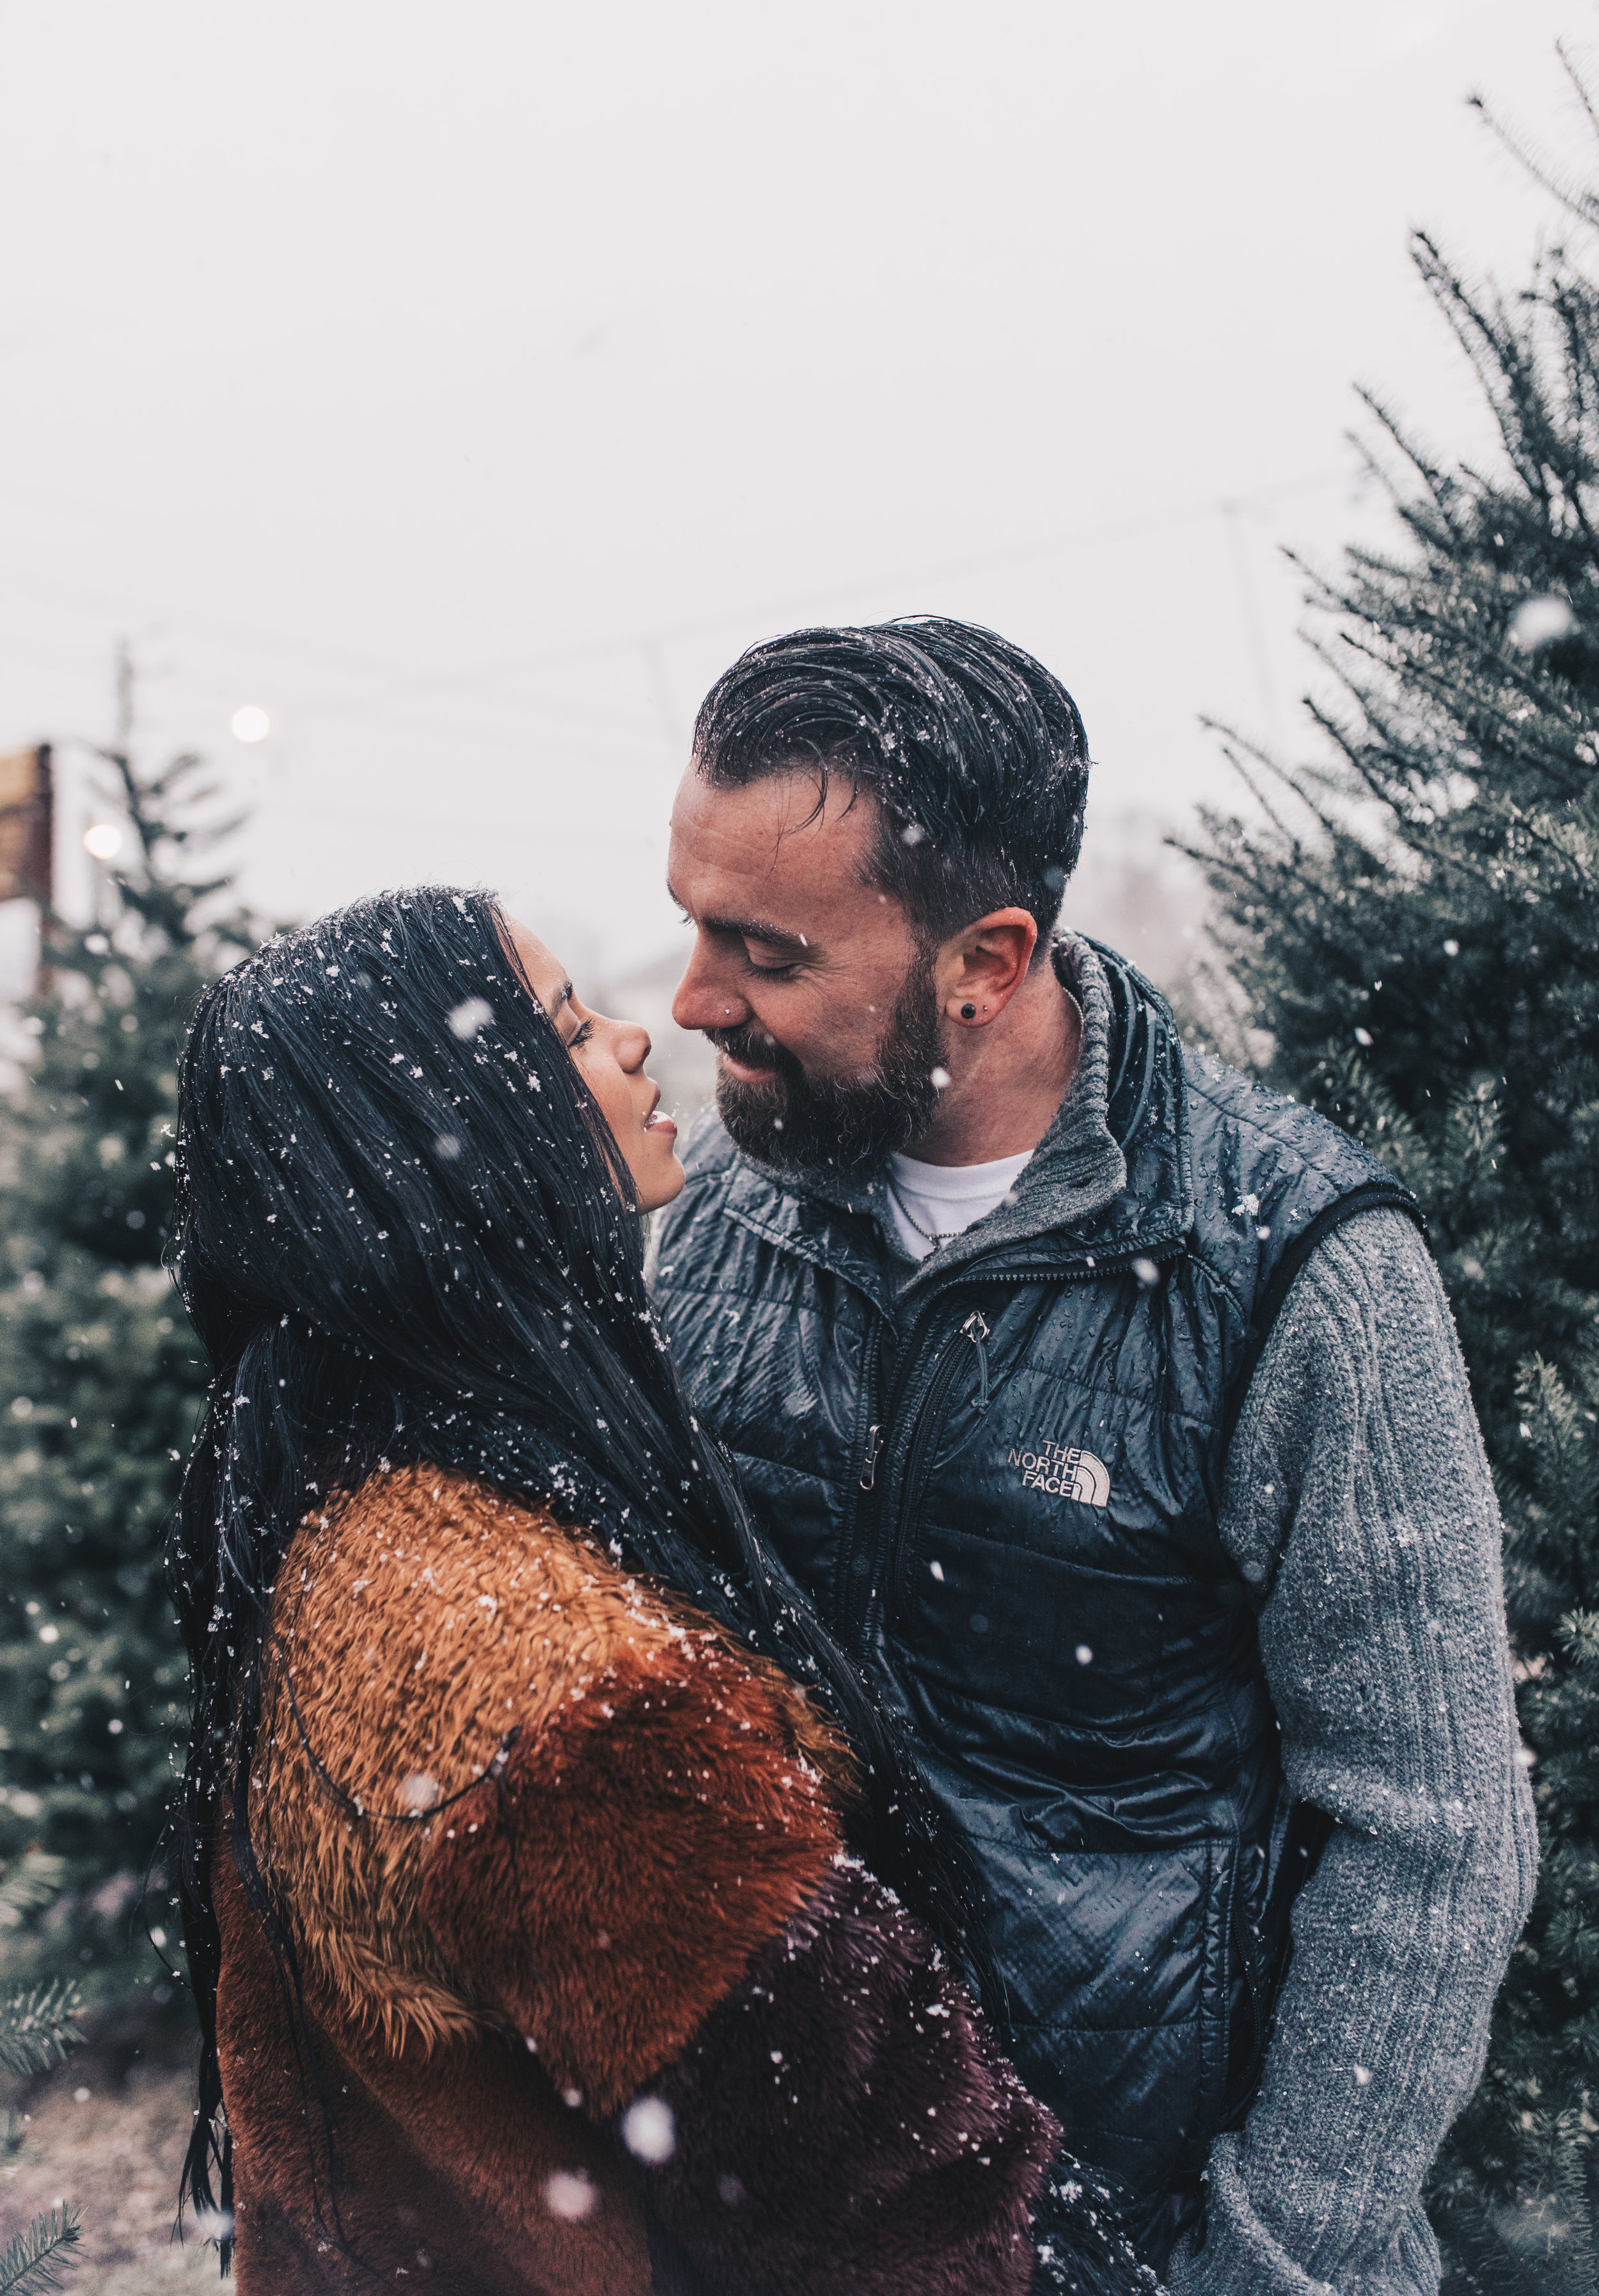 Winter Couples Photography, Winter Engagement Photography, Winter Wonderland Couples Photos, Illinois Couples Photographer